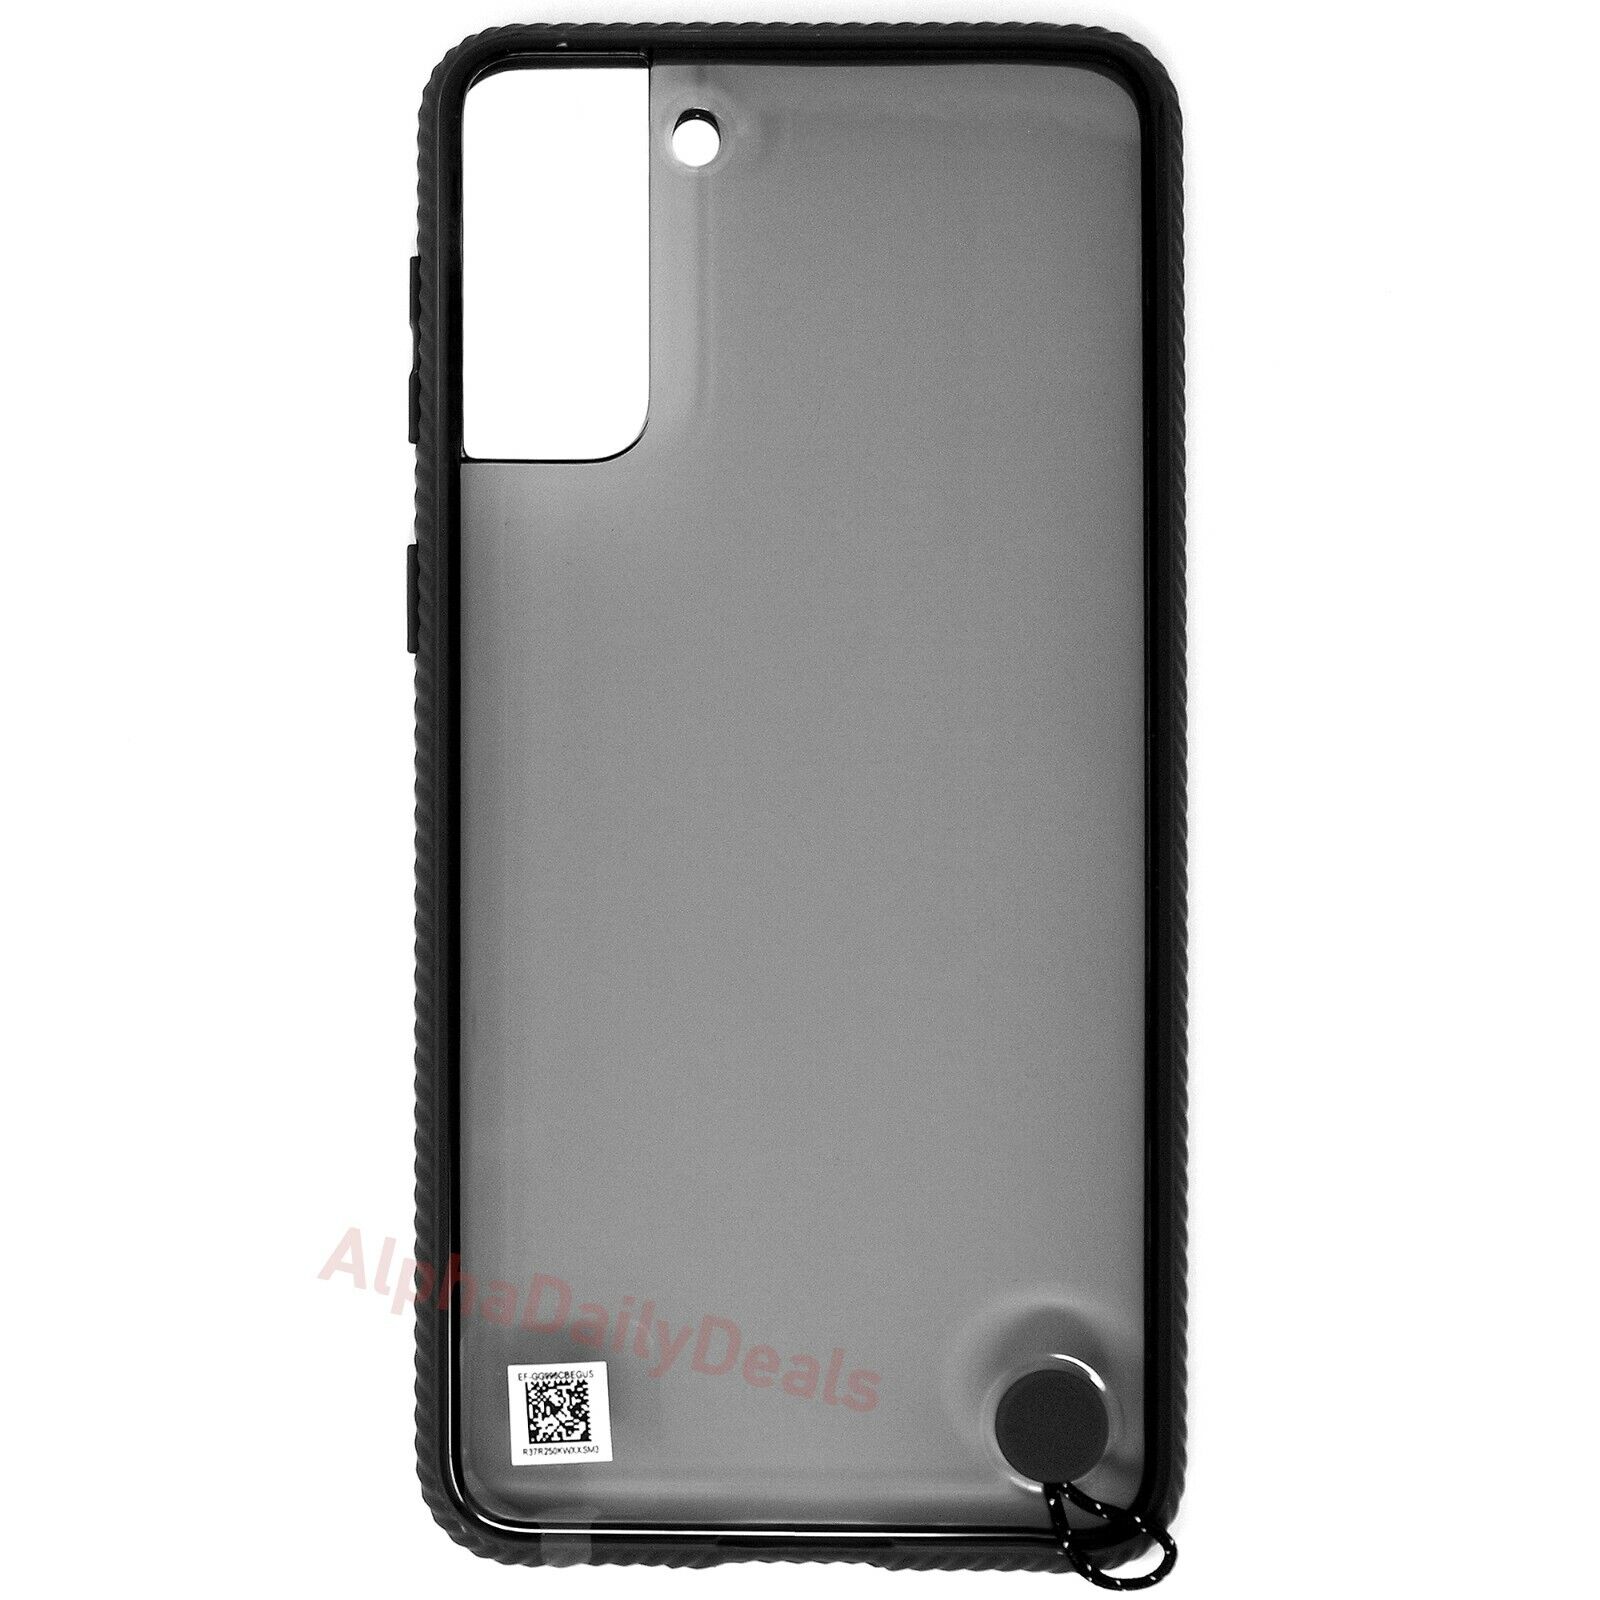 Genuine OEM Samsung Galaxy S21+ 5G Clear Protective Cover Case Black